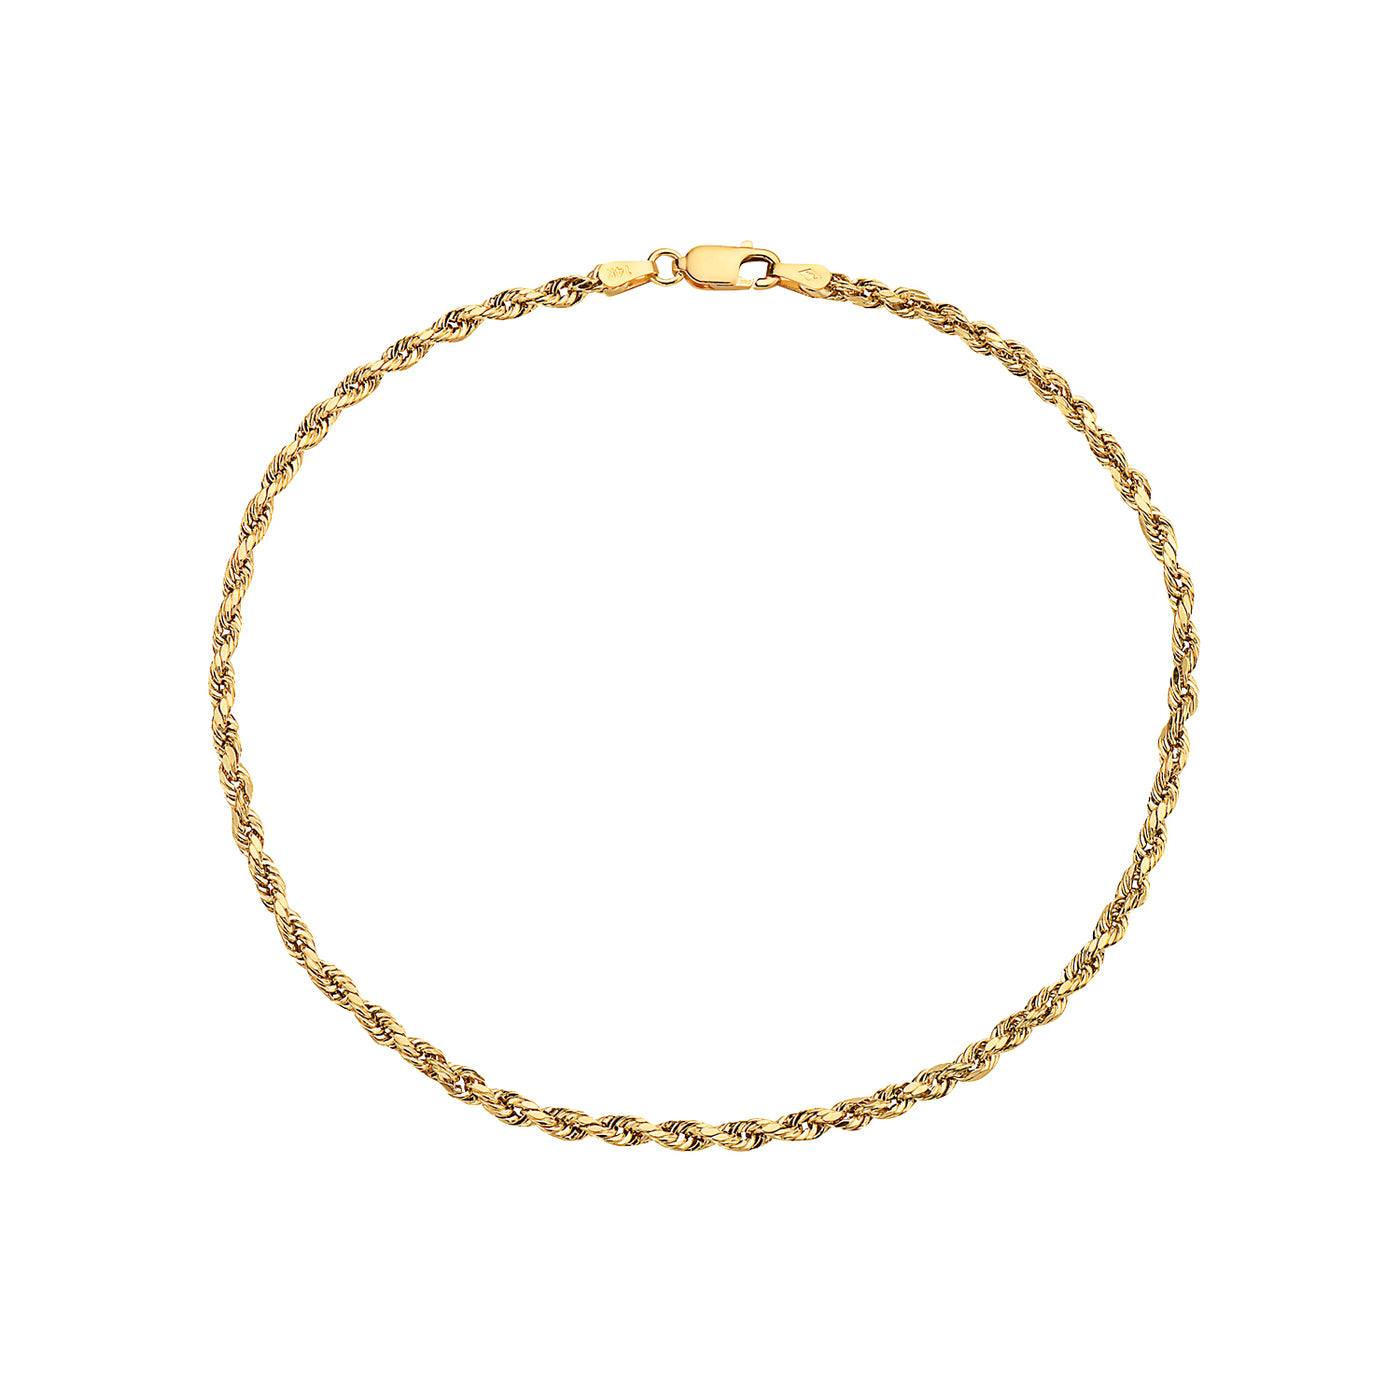 SOLID GOLD 3MM ROPE CHAIN ANKLET